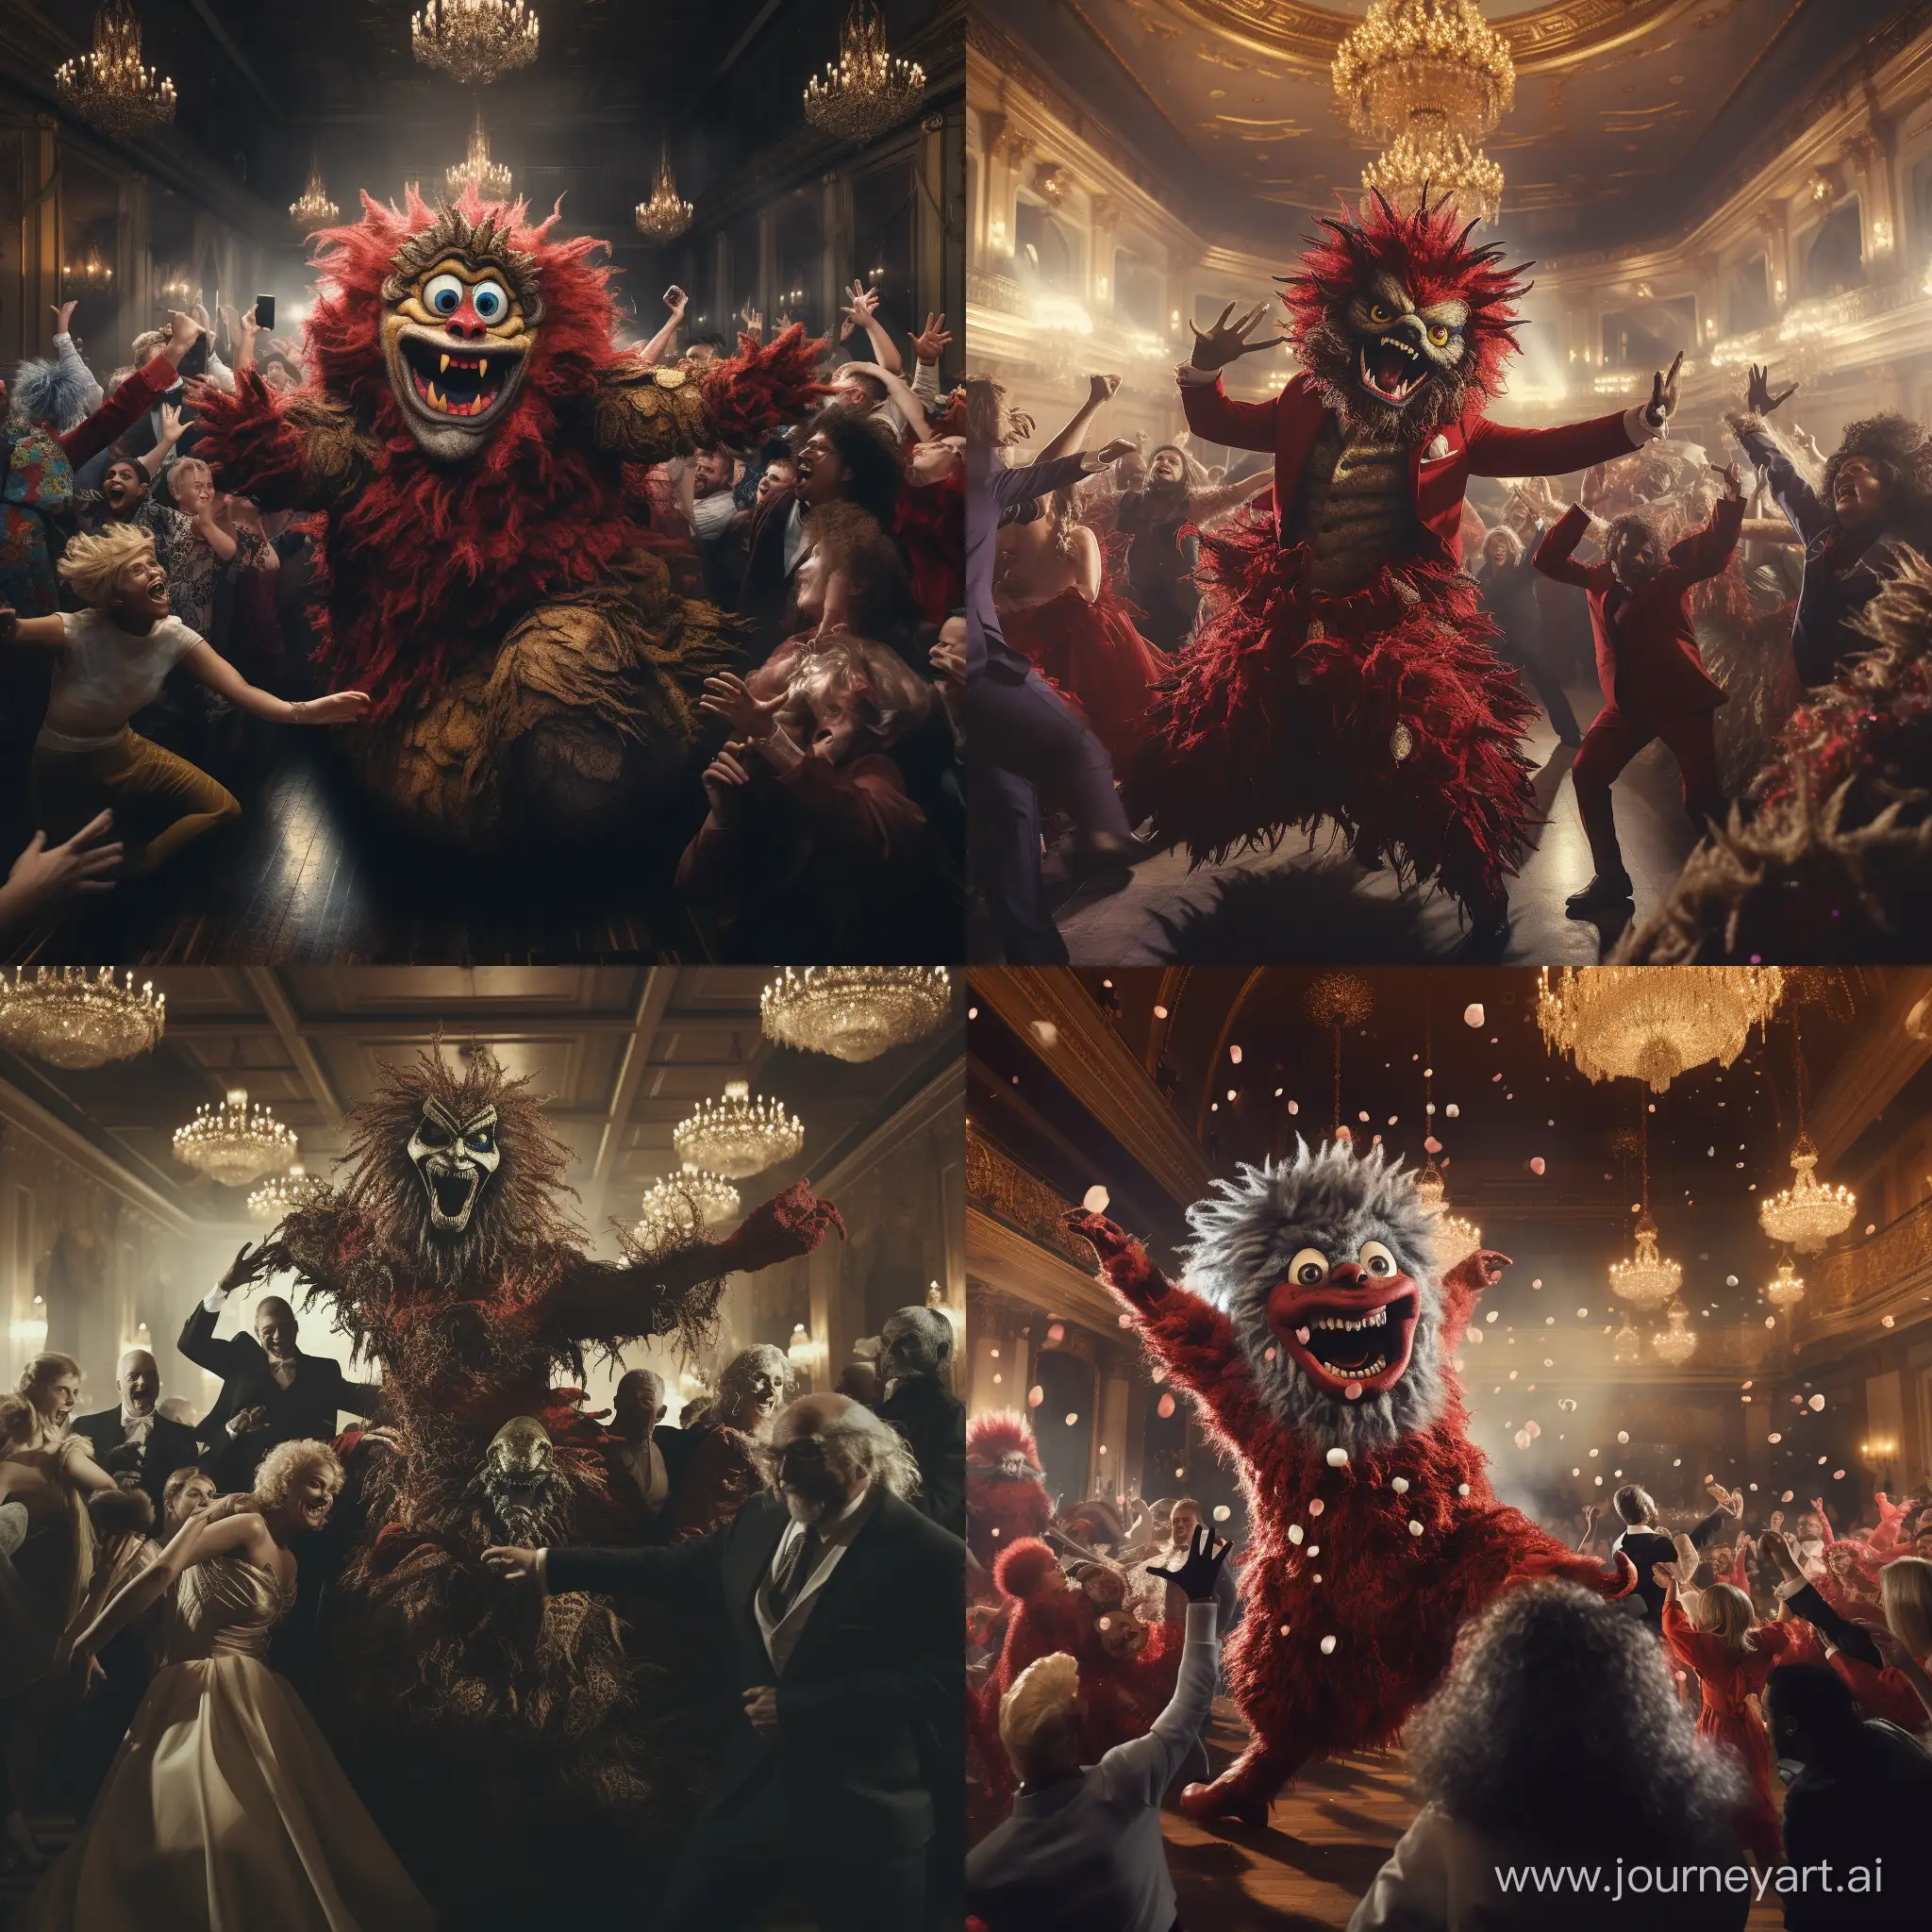 Mythical-Humanoids-and-Anthropomorphic-Monsters-Commandeer-a-Dramatic-Ballroom-Affair